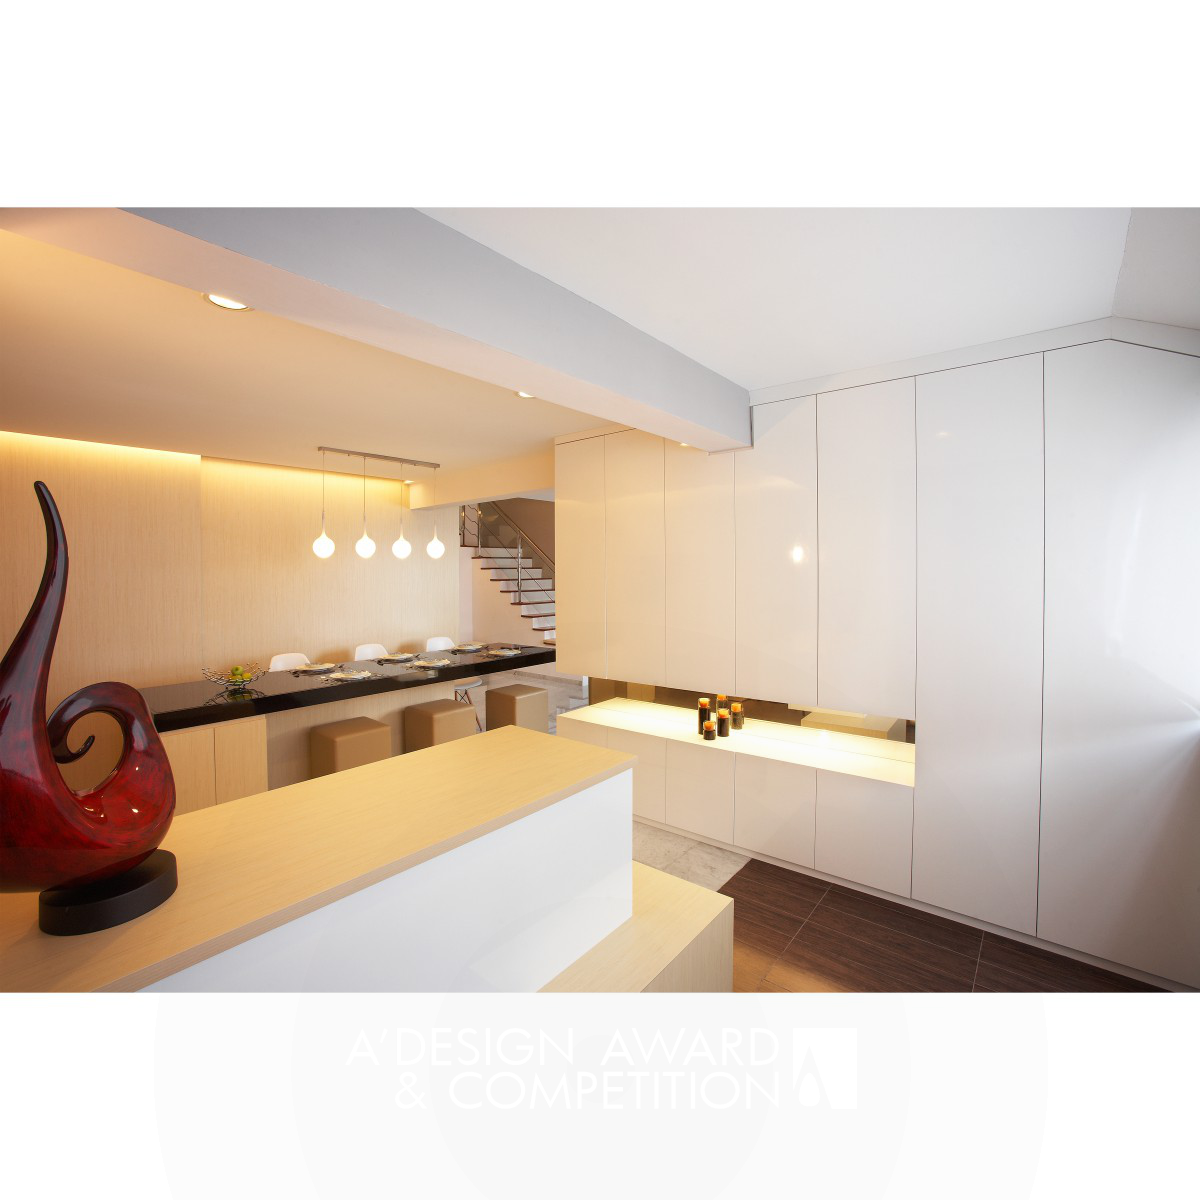 Contemporary Mansionette residential  <b>Interior space